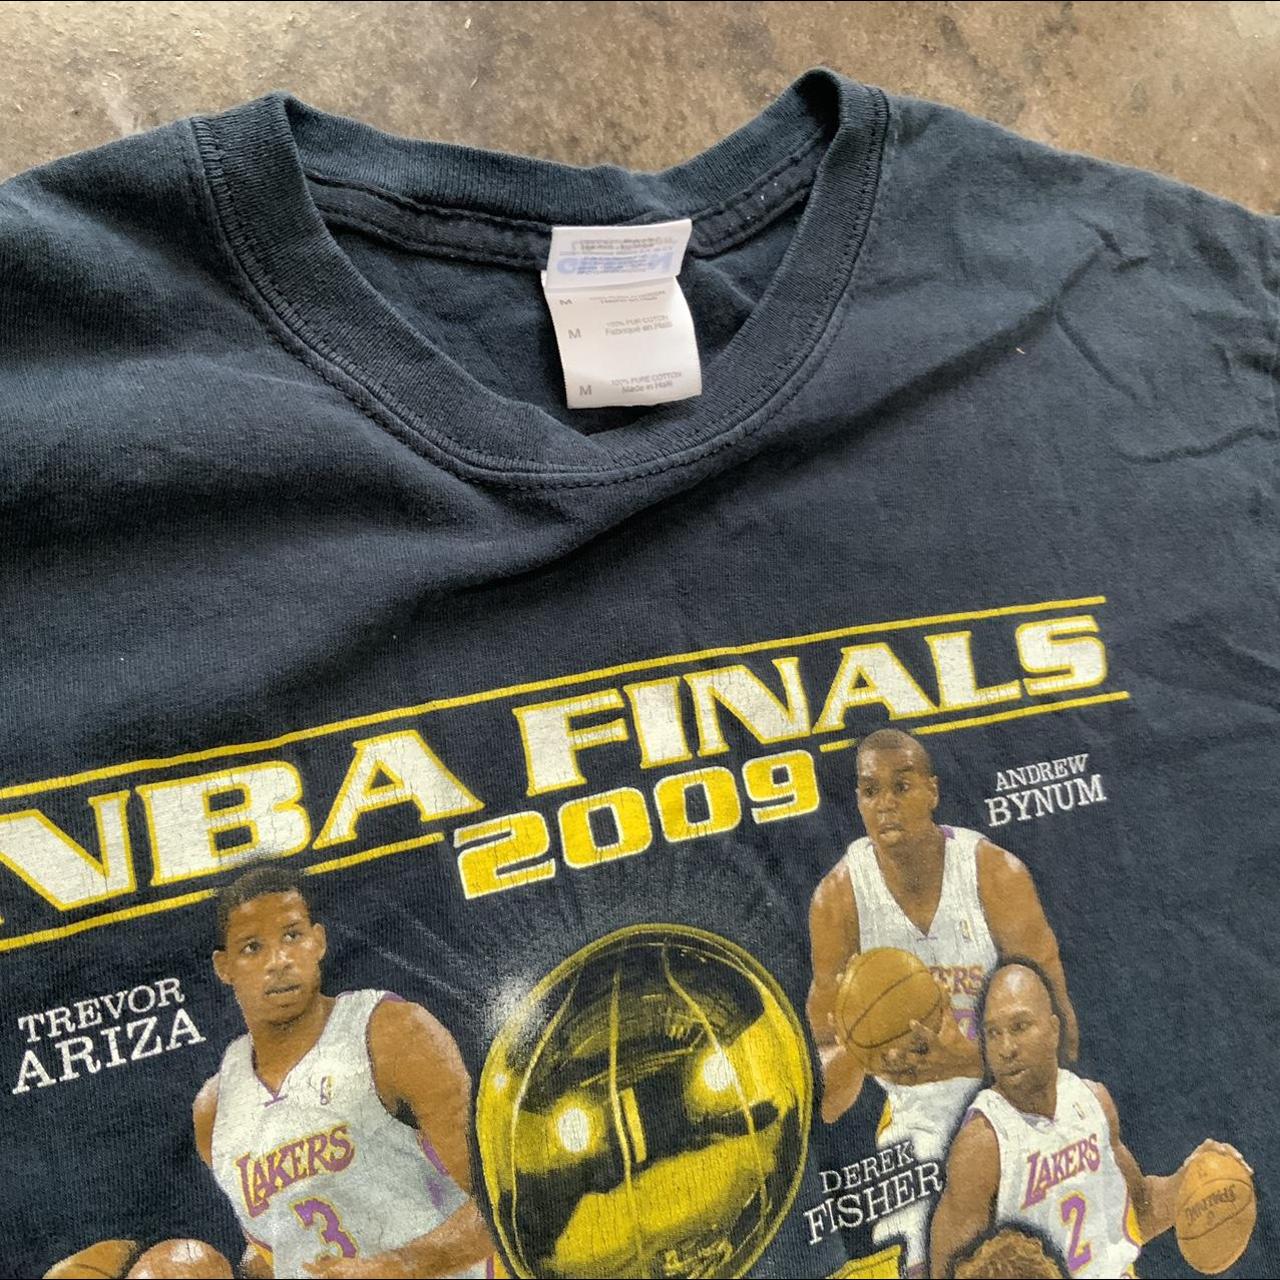 2009 nba finals lakers tee, Size m, Great condition